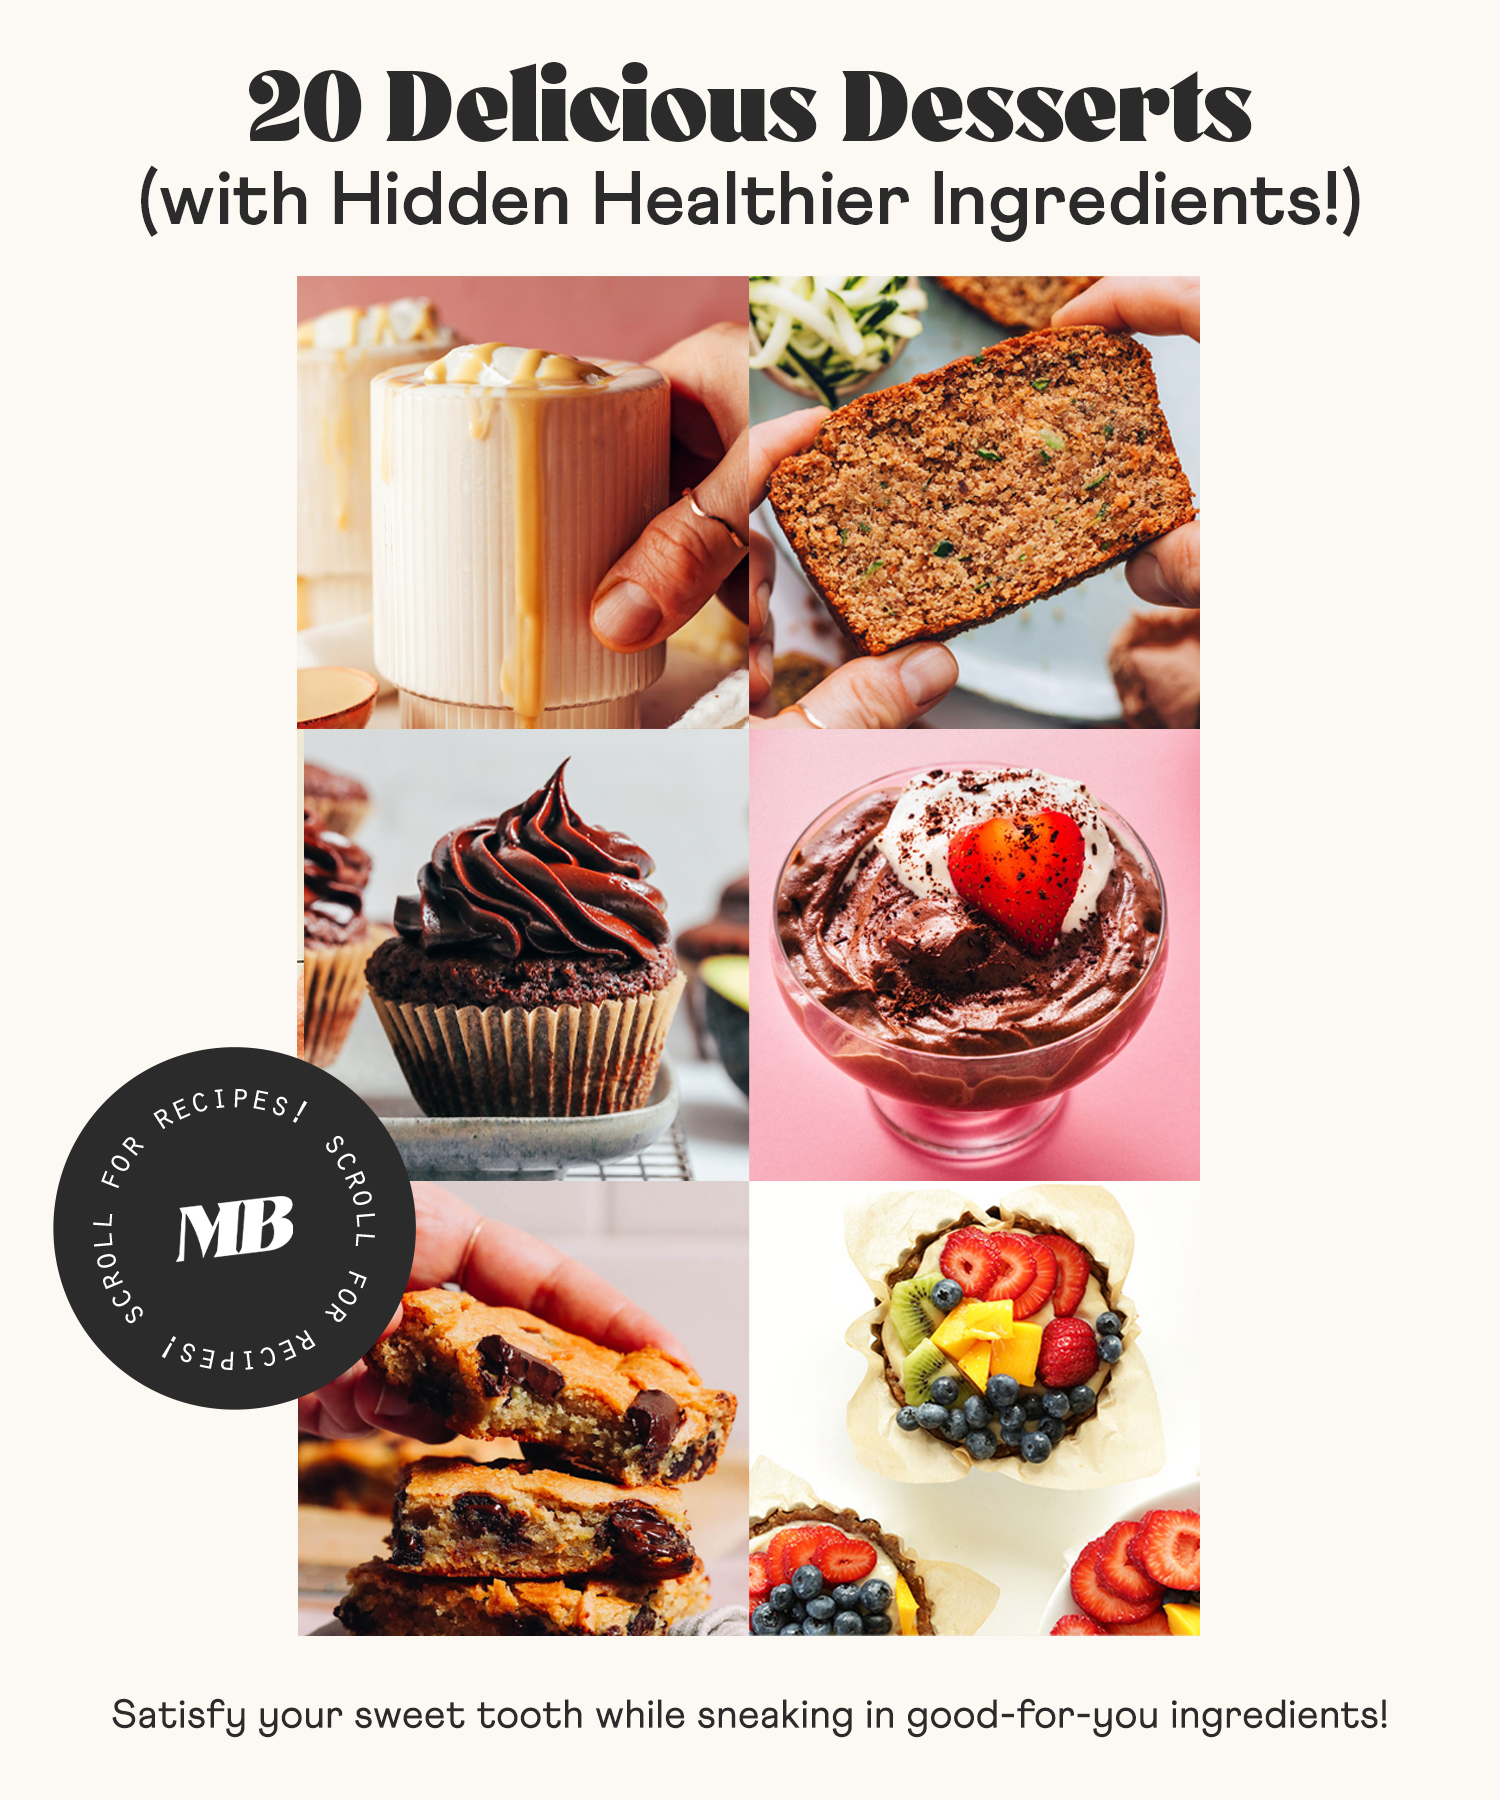 Photos of an assortment of desserts made with hidden healthier ingredients like beans and veggies